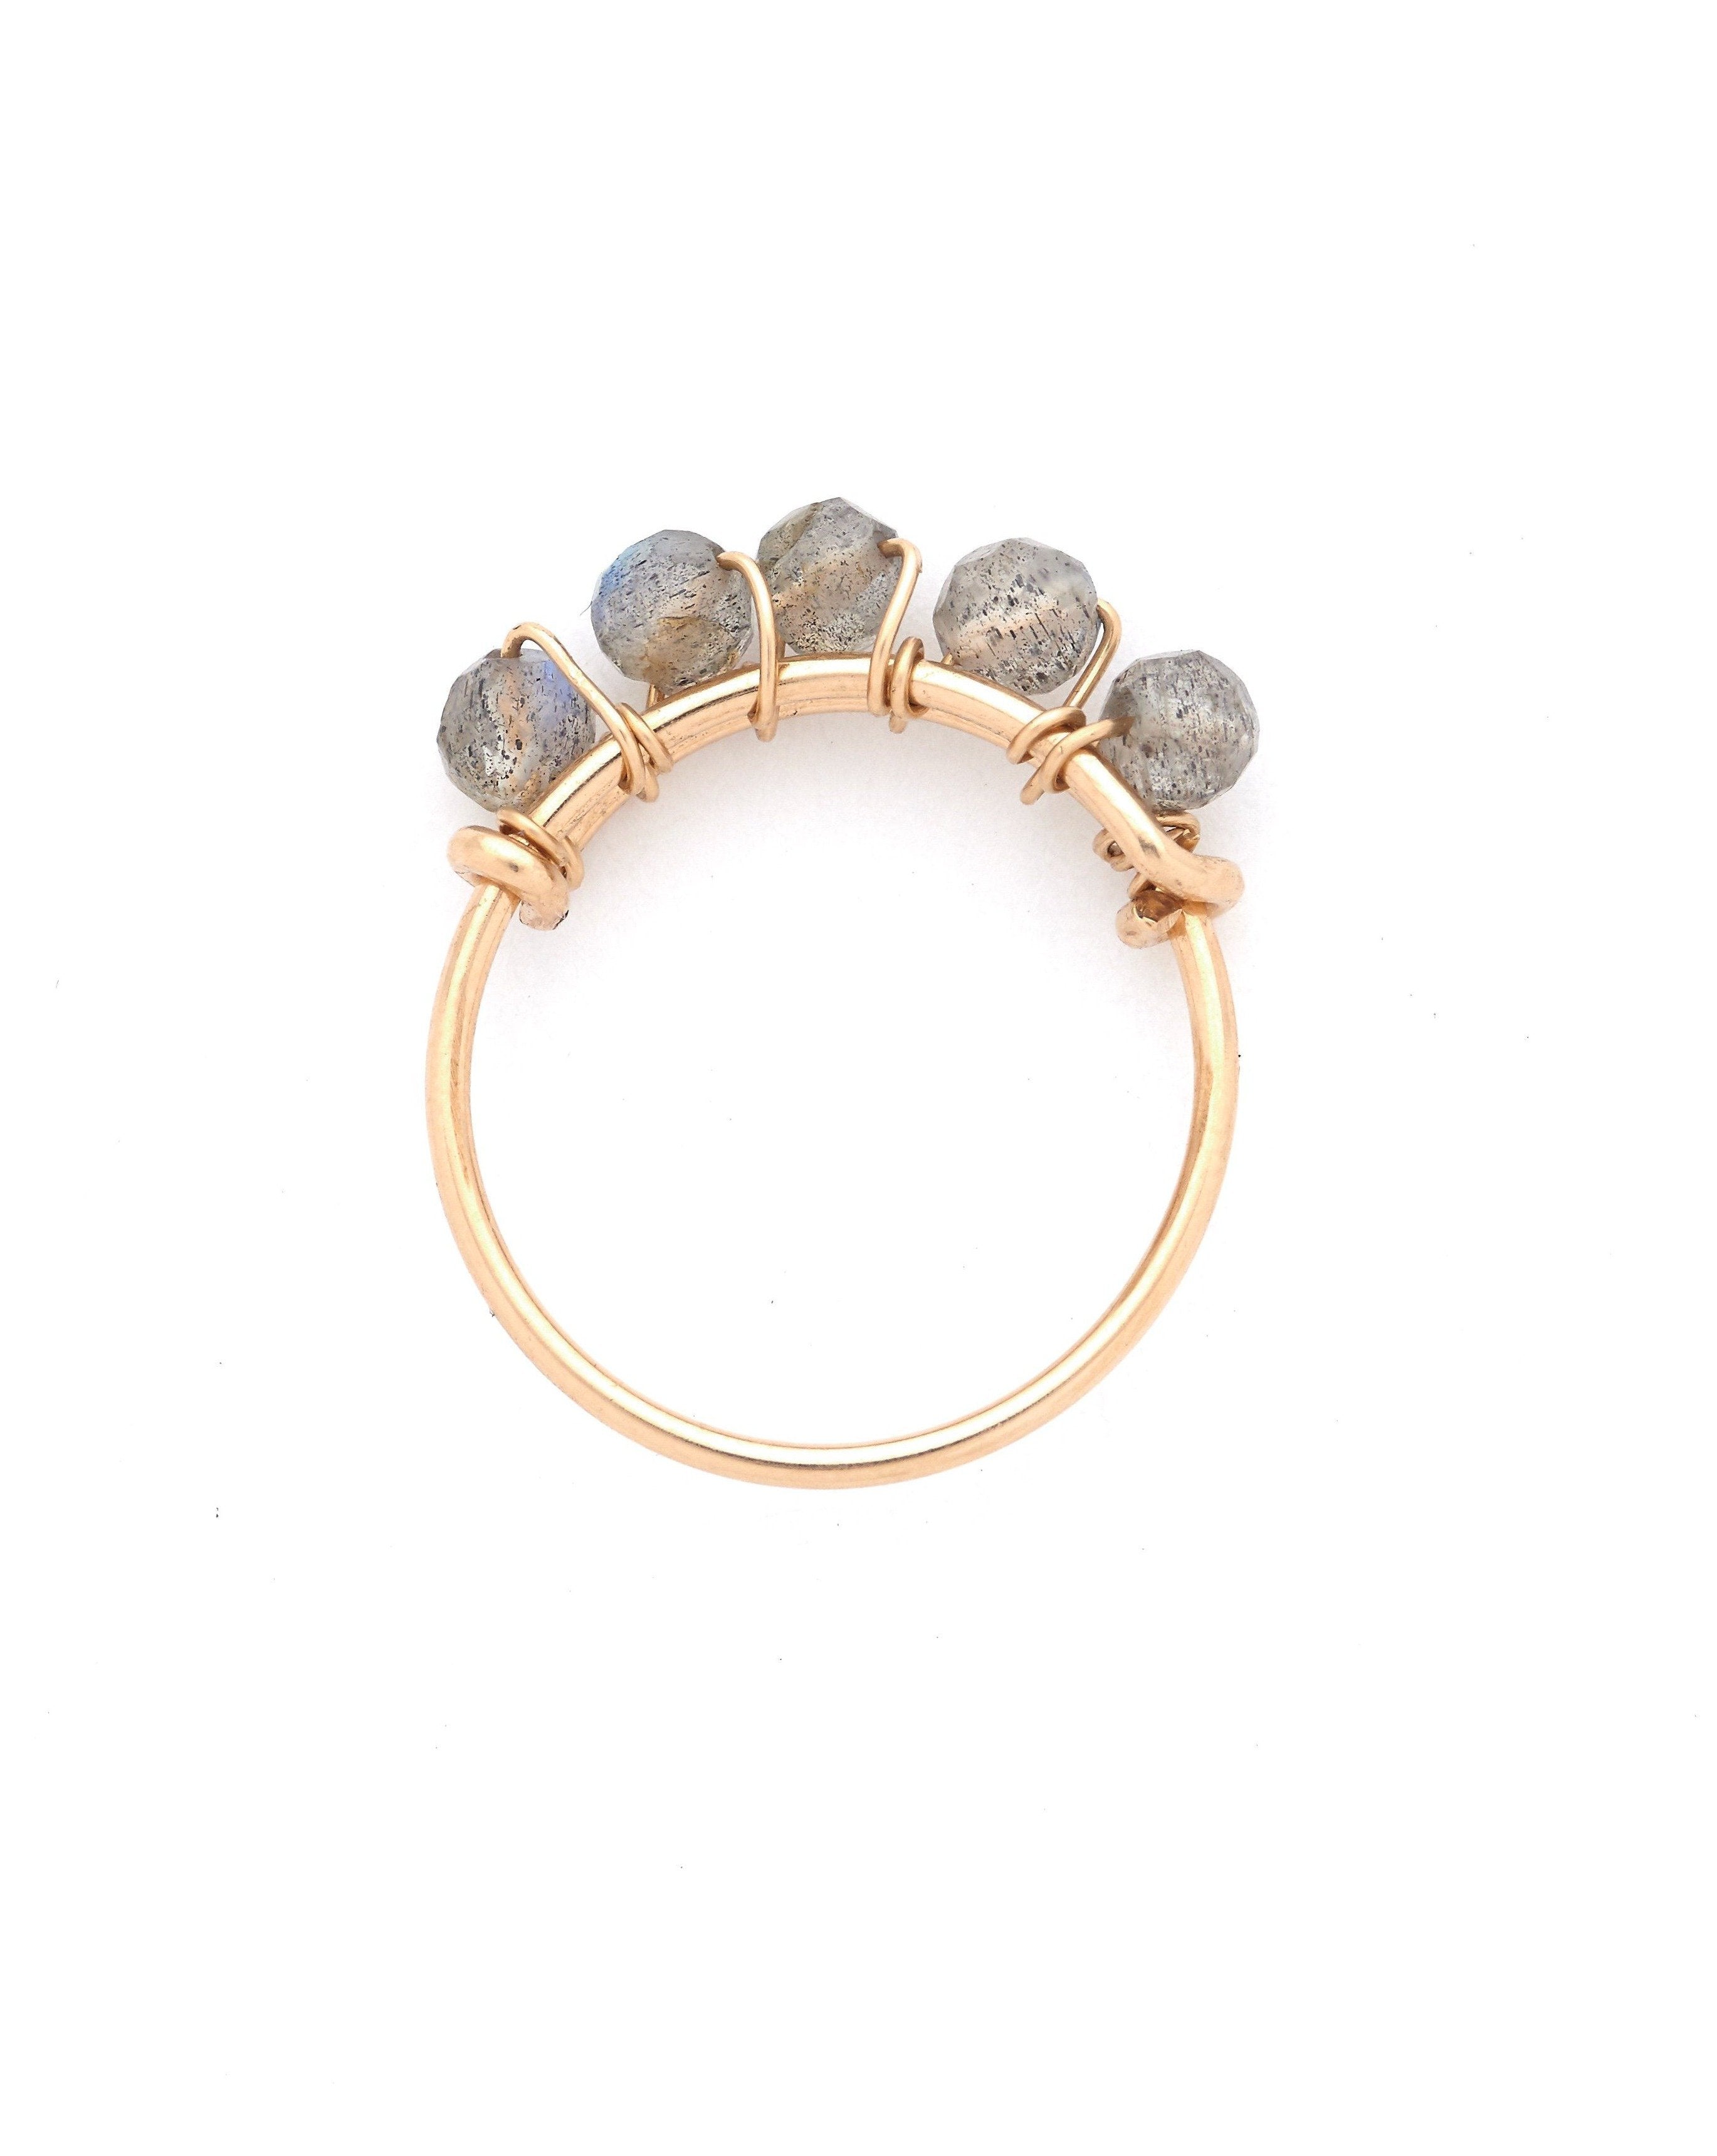 Gem Braided Ring by KOZAKH. A 1mm thick ring, crafted in 14K Gold Filled, featuring braided Labradorite gems.